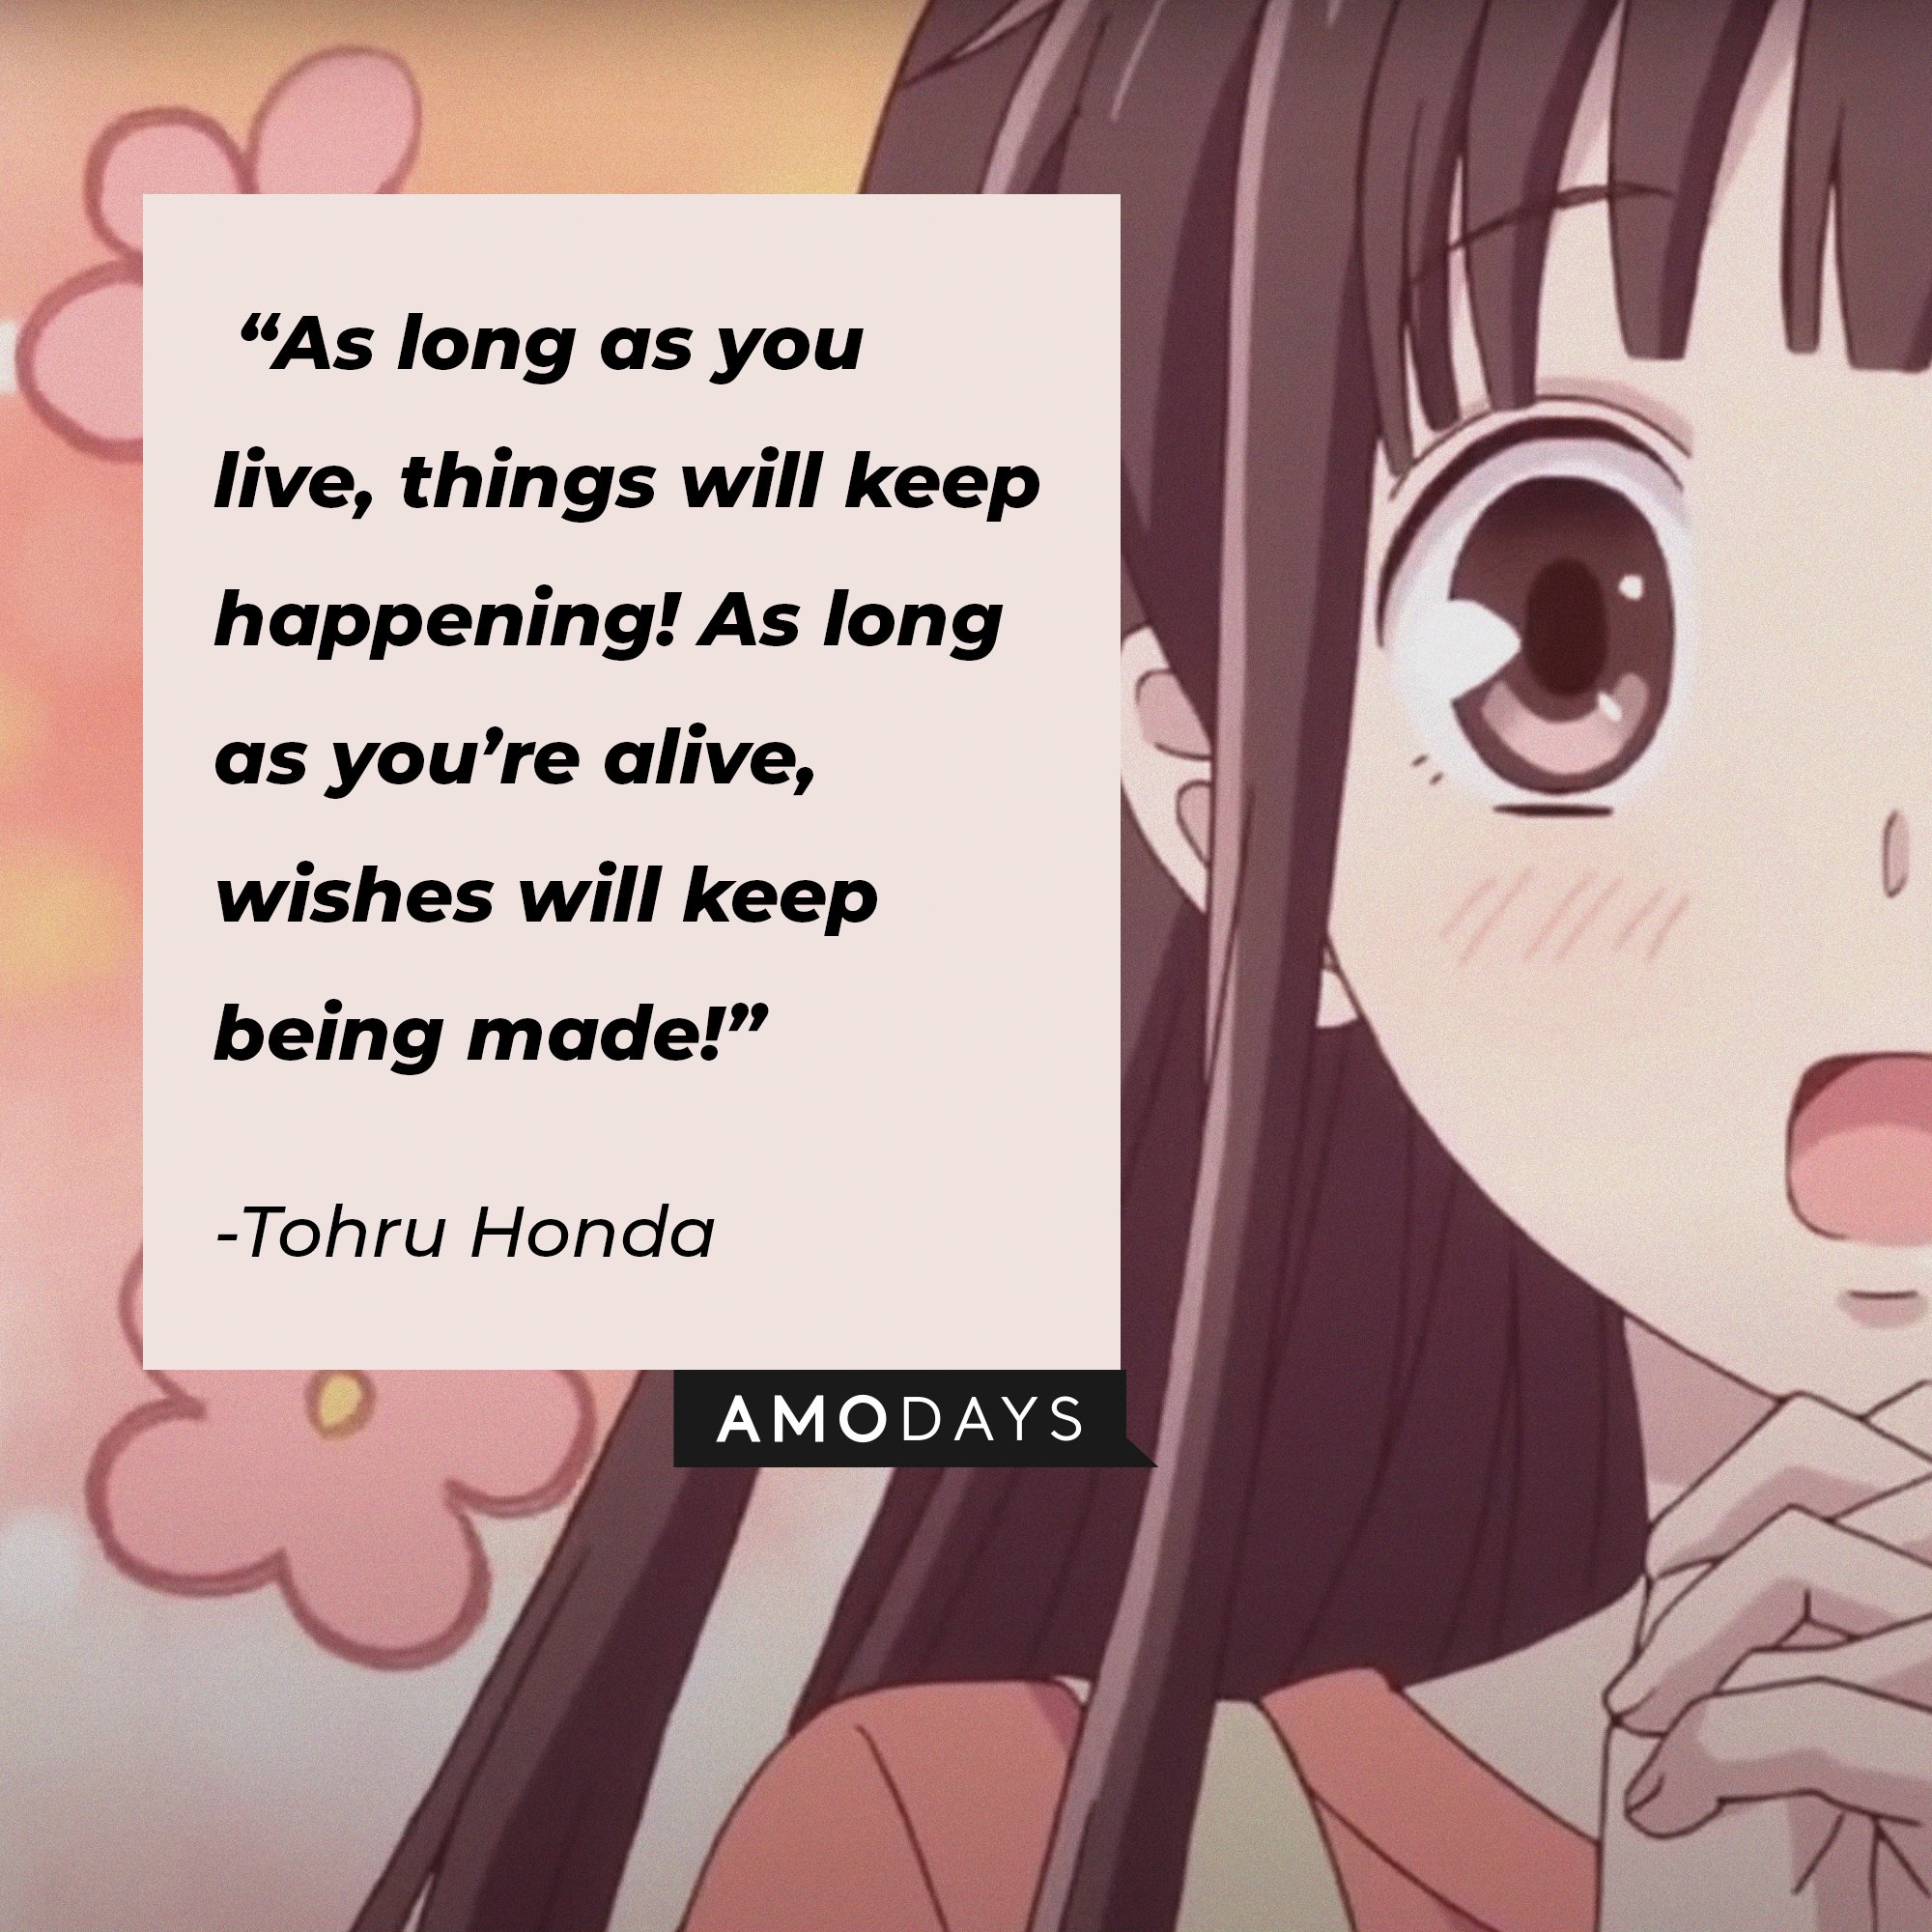 Tohru Honda’s quote: “As long as you live, things will keep happening! As long as you’re alive, wishes will keep being made!” | Image: AmoDays